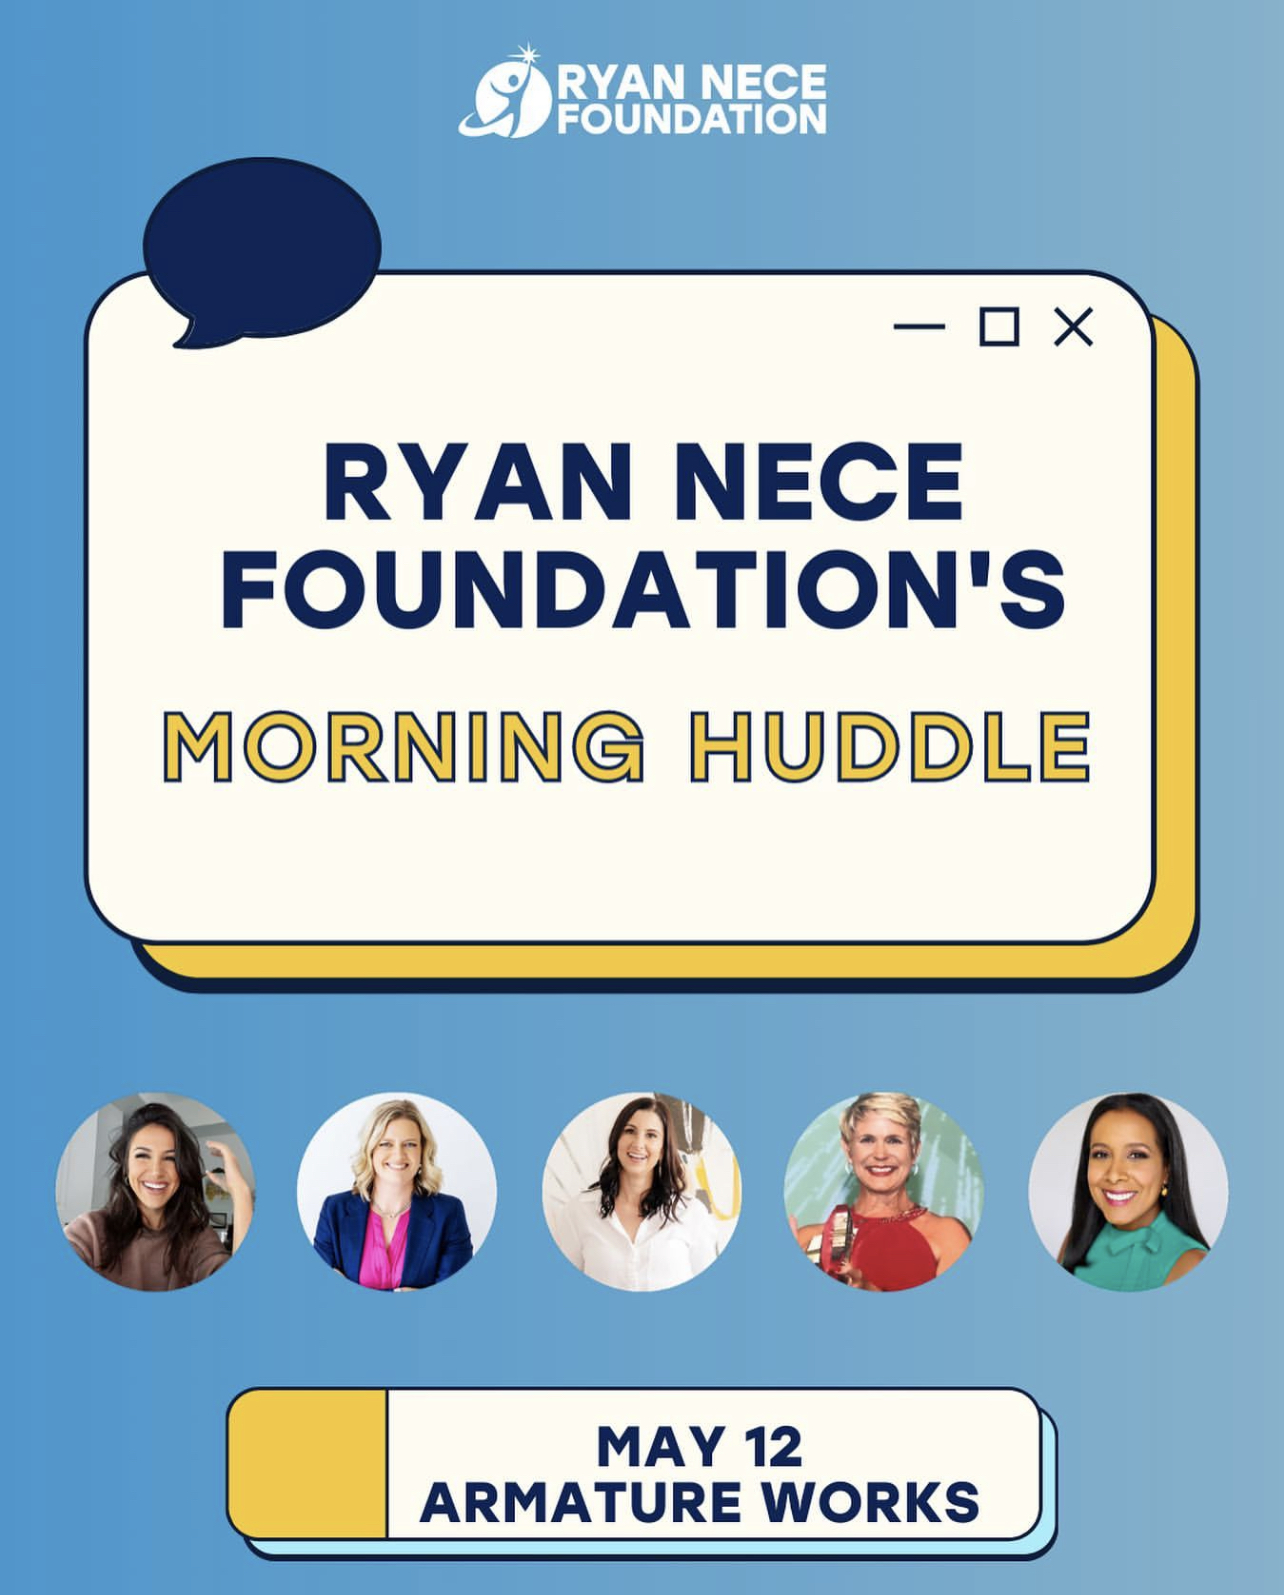 Enhance Your Mental Health Through Giving Back: Join the Ryan Nece Foundation’s Morning Huddle Fundraising Event on May 12